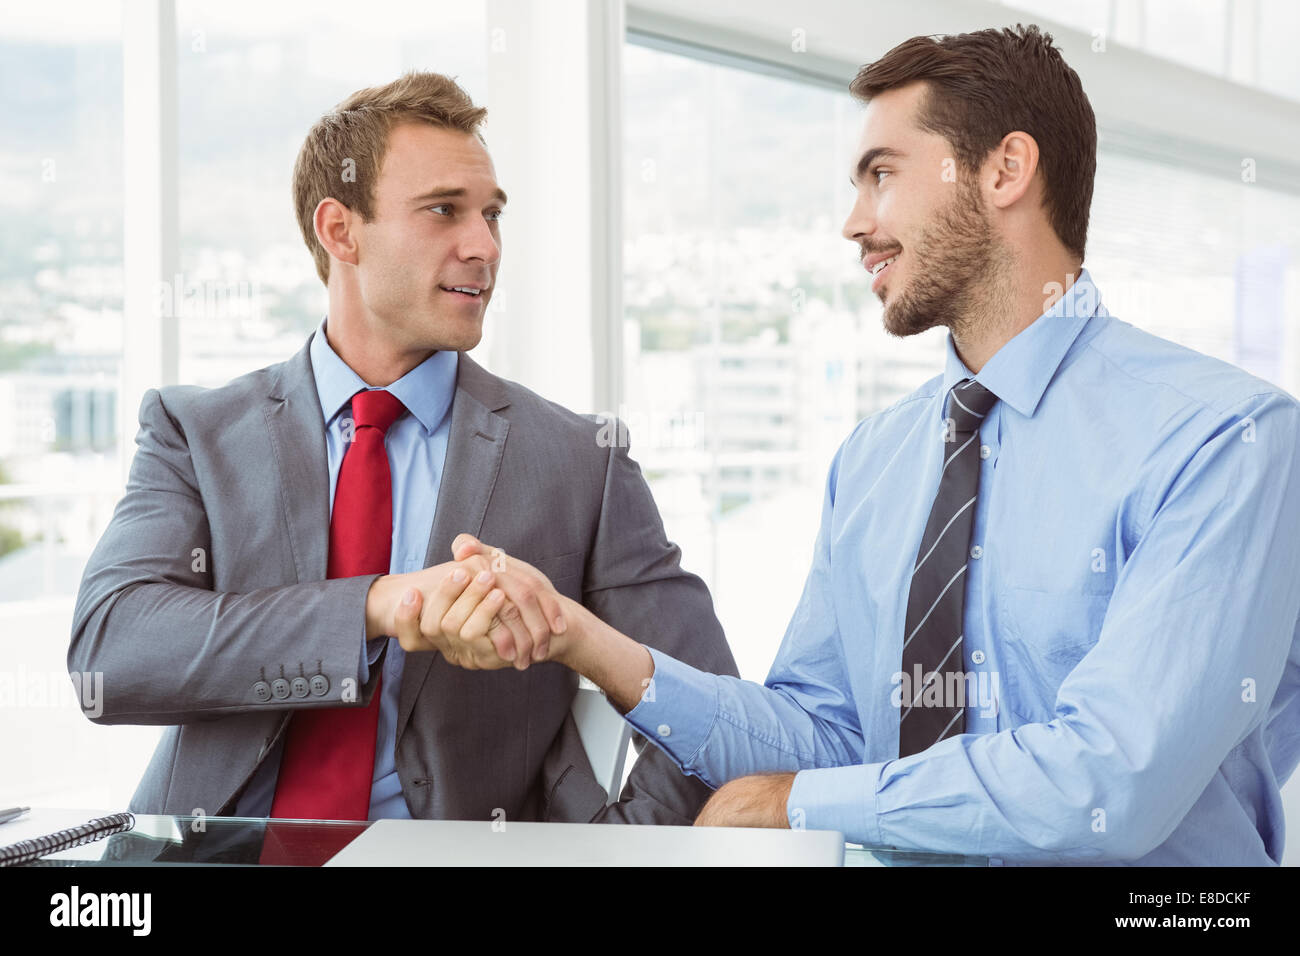 Executives shaking hands in board room meeting Stock Photo